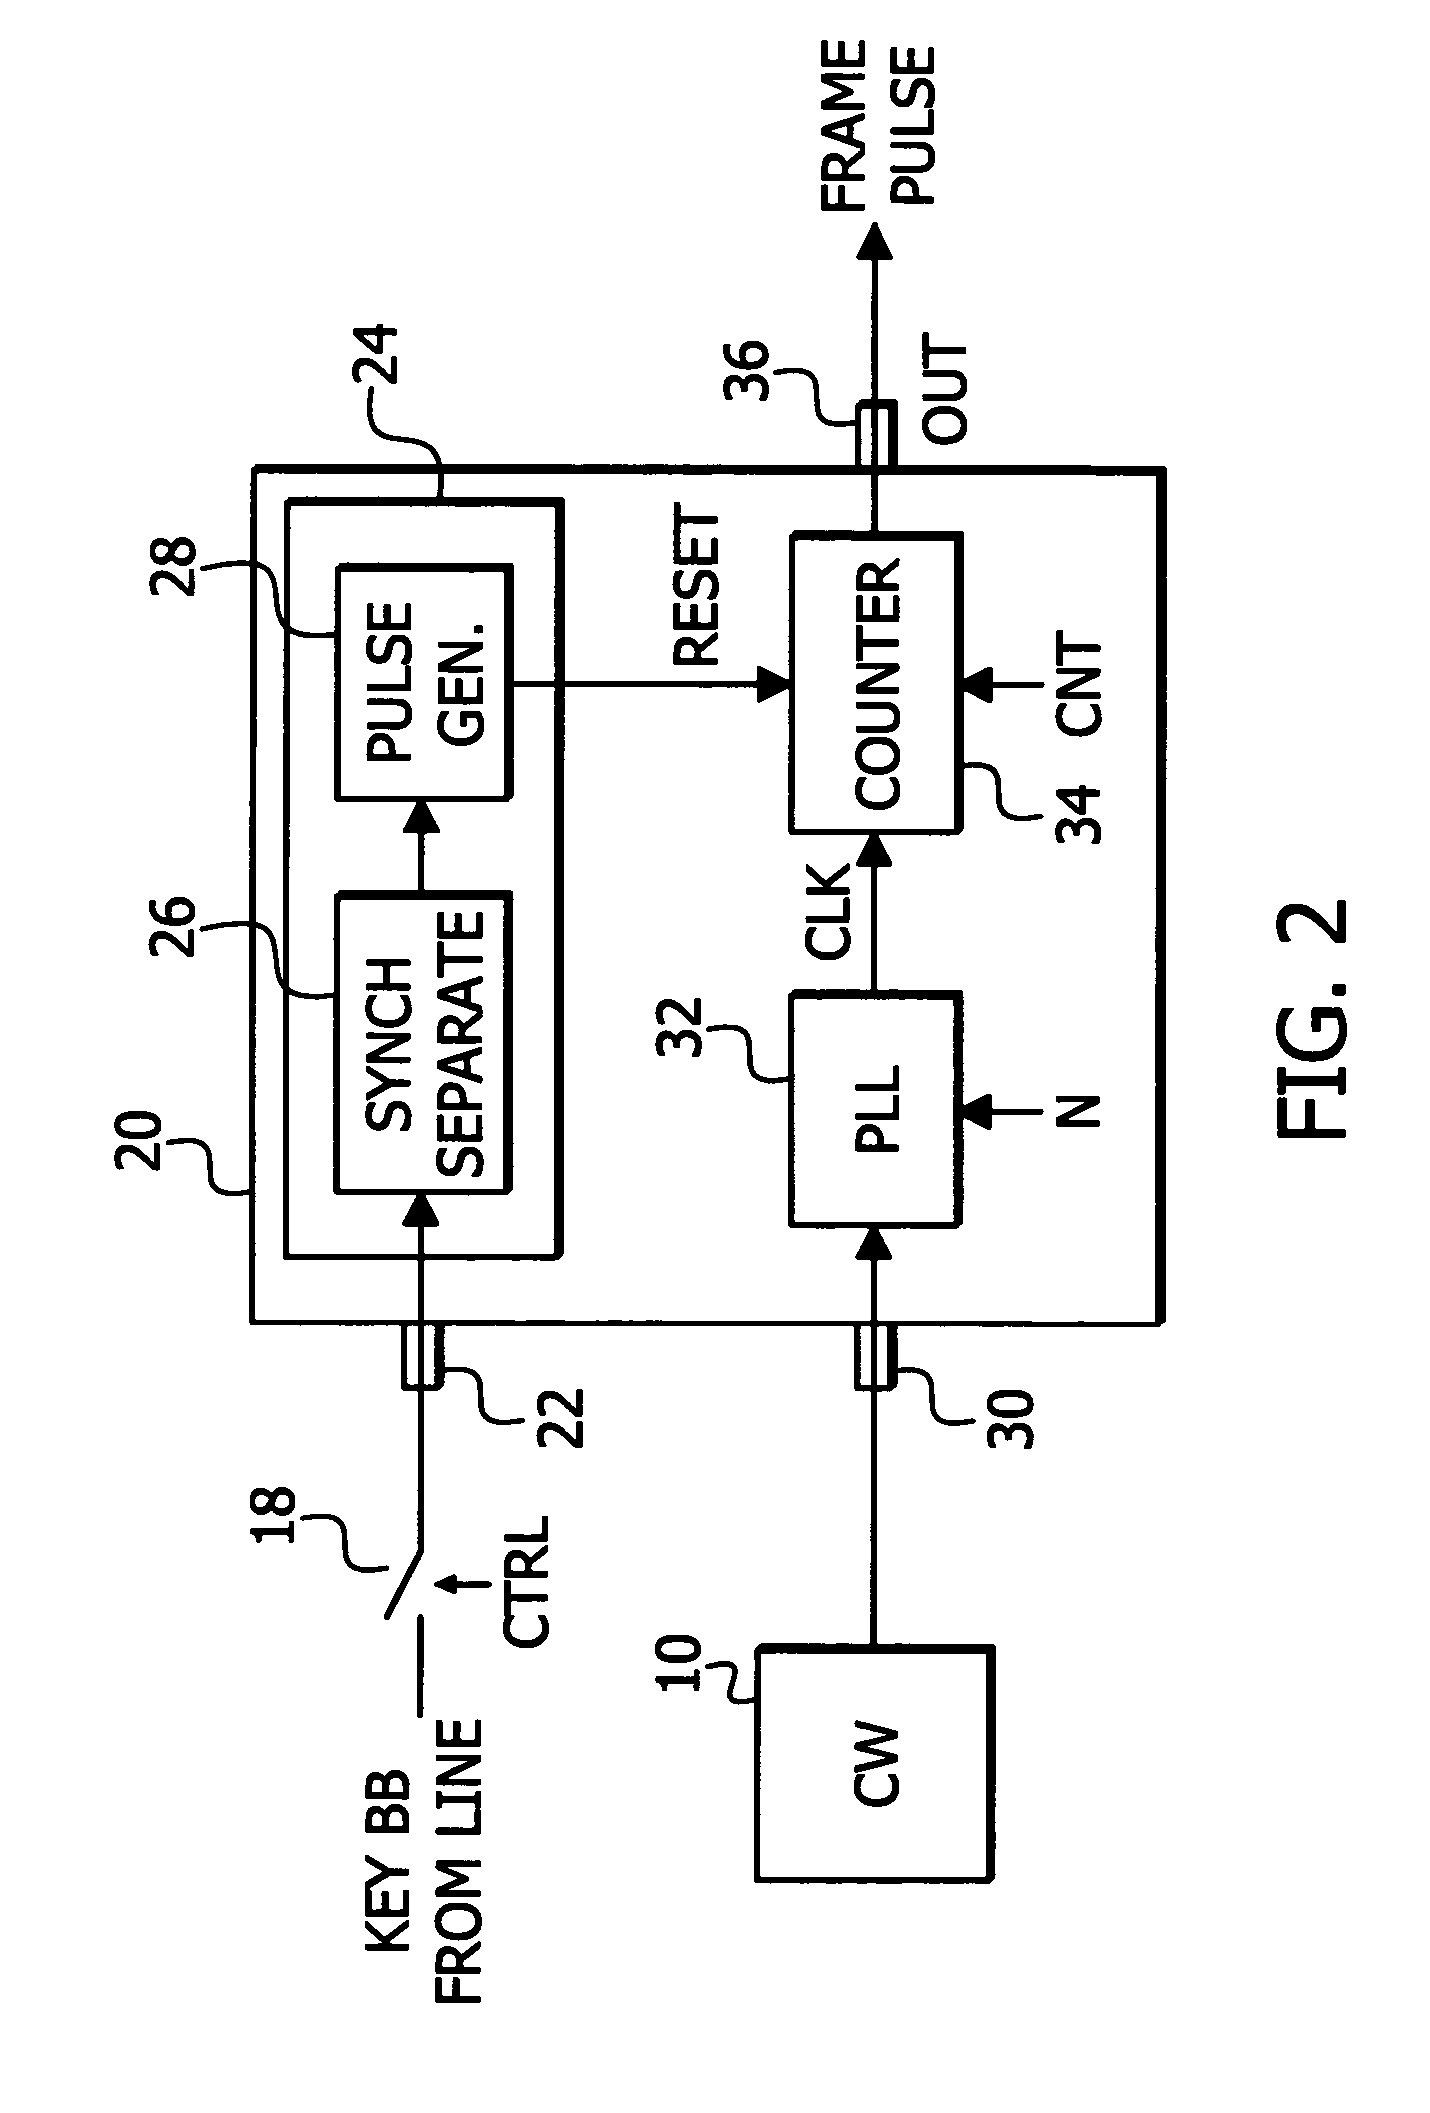 Method and apparatus for generating a reference television signal